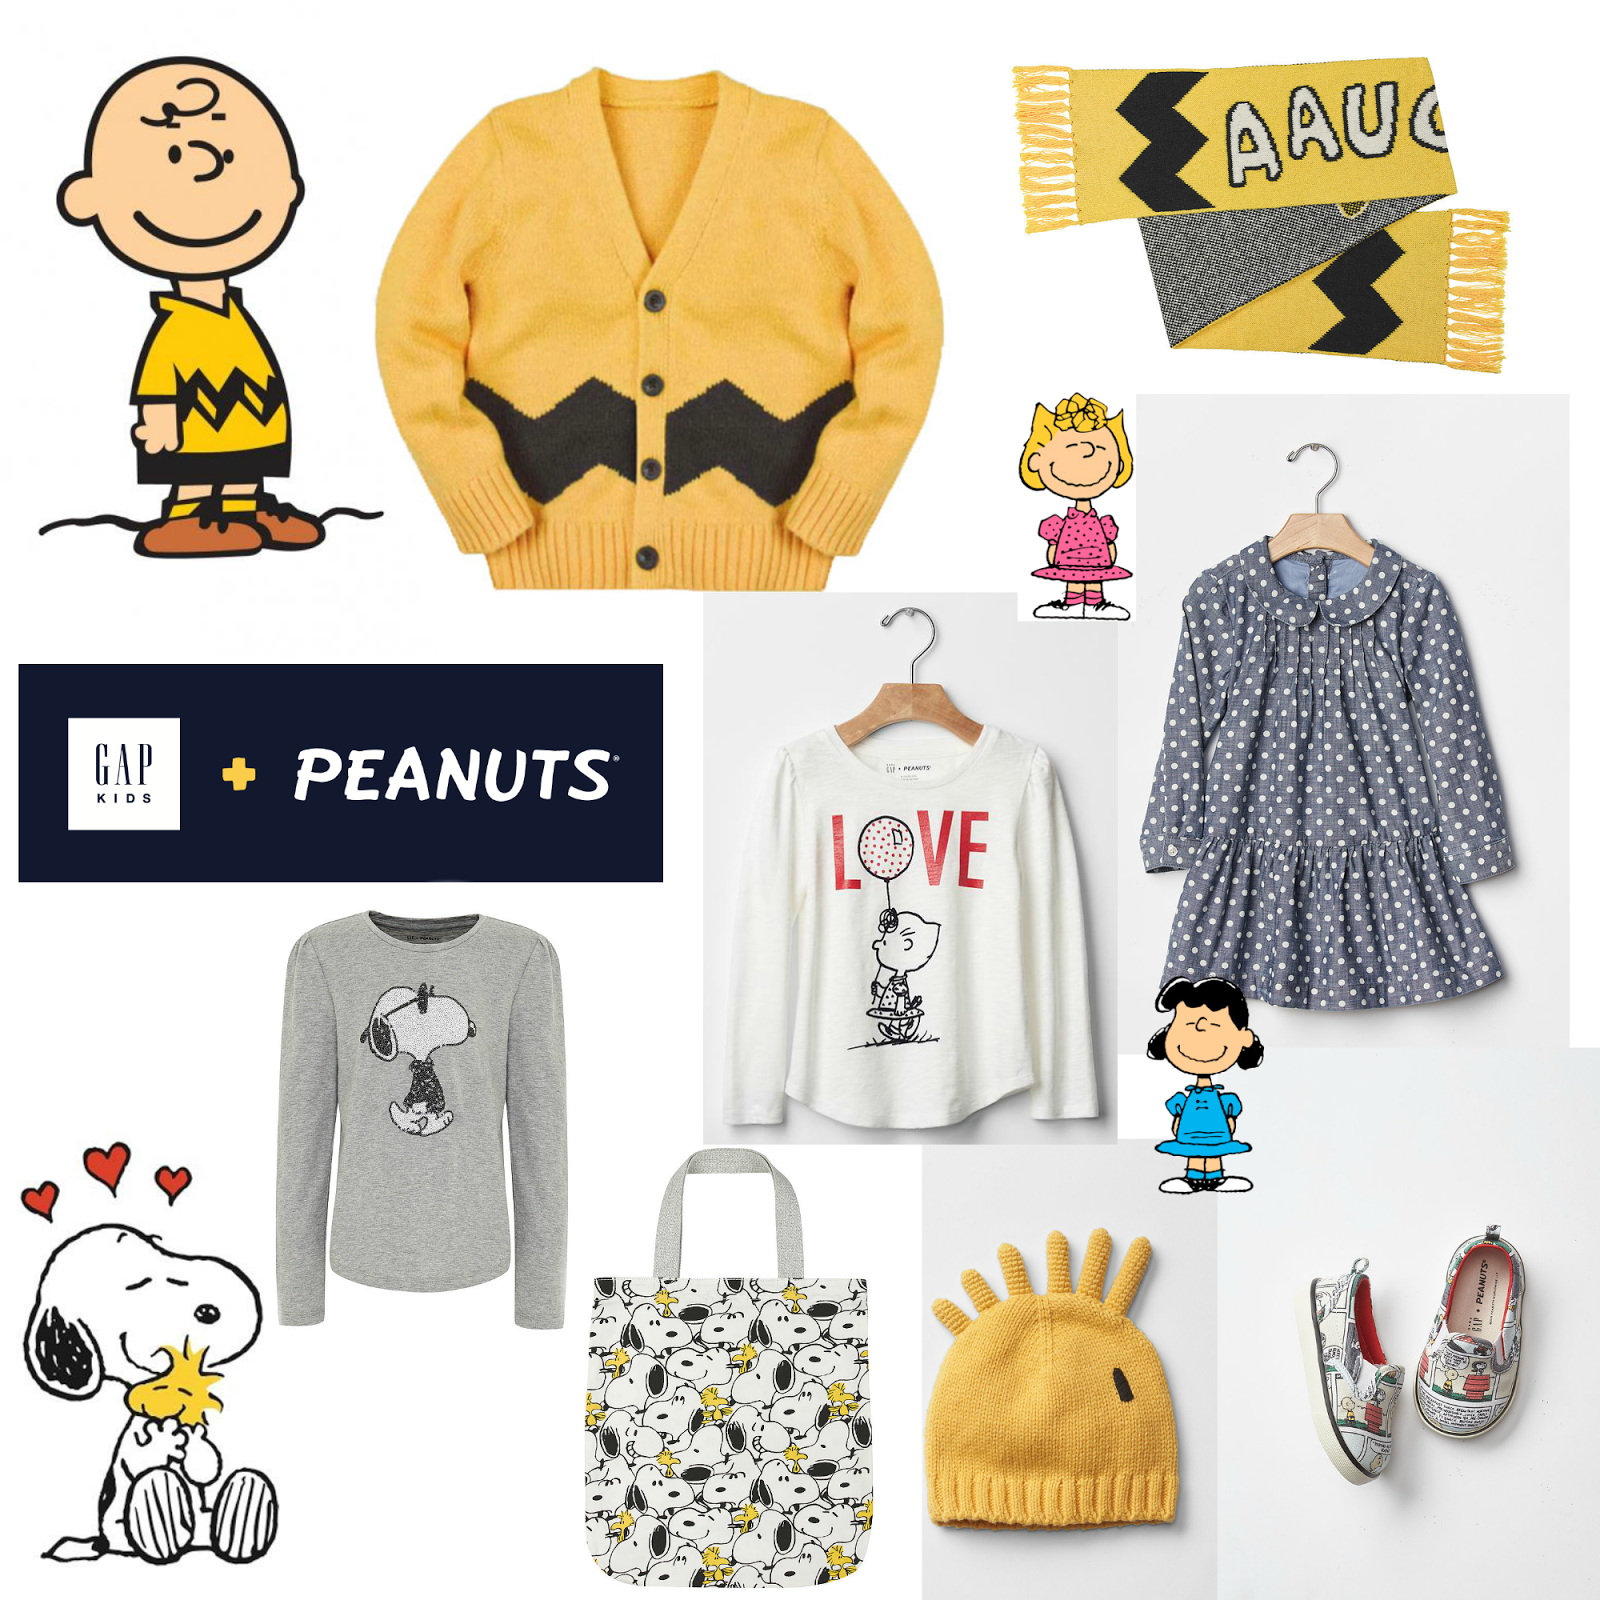 V. I. BUYS: The Gap + Peanuts collection has finally arrived, peanuts, gap, limited editions, coloration, ew collection, new launch, snoopy, charlie brown,a  charlie brown Christmas, Christmas fashion, kids style, shopping, new collection, gap, kids, in=atge, retro, the peanuts lie, anniversary,    As you may know I love a collaboration. So you can imagine my excitement at the Gap + Peanuts collection that has literally just launched this week.  I grew up watching (and reading) Charlie Brown, Snoppy and the gang - as I'm sure you did - so this collection may be slight more exciting to adults that kids …at the moment.  As the timing couldn't be any more perfect with the release of The Peanuts Movie in December (it might be wise to get the little kitted out for it now) and this year also marks the 50th anniversary of A Charlie Brown Christmas (Classic comic strip Peanuts was created by Charles M. Schulz almost 65 years ago). Here's a ltitle reminder  V. I. BUYS: The Gap + Peanuts collection has finally arrived, peanuts, gap, limited editions, coloration, ew collection, new launch, snoopy, charlie brown,a  charlie brown Christmas, Christmas fashion, kids style, shopping, new collection, gap, kids, in=atge, retro, the peanuts lie, anniversary,  PICT: Peanuts  This Gap + Peanuts limited edition collection features vintage artwork and exclusive hand sketched drawing across the baby wear giving it a more timeless feel rather than a 'character' feeling (yeah). For babies there's unisex onesies, a Snoopy inspired Sherpa suit, a revisable blanket and 'mood' bodysuits.  V. I. BUYS: The Gap + Peanuts collection has finally arrived, peanuts, gap, limited editions, coloration, ew collection, new launch, snoopy, charlie brown,a  charlie brown Christmas, Christmas fashion, kids style, shopping, new collection, gap, kids, in=atge, retro, the peanuts lie, anniversary,  Hey Snoppy,.,,,   For the tots and kids look out for a Sally (Charlie Browns sister) and Lucy inspired polka dot ruffled dress, comic strip printed hoodies and pumps, graphic tees, a faux leather flying jacket and of course the quintessential Charlie Brown yellow and black zigzag stripe on knitwear.  Accessories include printed totes, quirky scarves and too-die for hats (I mean who doesn't need that Snoopy and Woodstock hat in their life!) Prices start from £6.95.  Although, they missed off my fave character Peppermint Patty….    V. I. BUYS: The Gap + Peanuts collection has finally arrived, peanuts, gap, limited editions, coloration, ew collection, new launch, snoopy, charlie brown,a  charlie brown Christmas, Christmas fashion, kids style, shopping, new collection, gap, kids, in=atge, retro, the peanuts lie, anniversary,    V. I. BUYS: The Gap + Peanuts collection has finally arrived, peanuts, gap, limited editions, coloration, ew collection, new launch, snoopy, charlie brown,a  charlie brown Christmas, Christmas fashion, kids style, shopping, new collection, gap, kids, in=atge, retro, the peanuts lie, anniversary,     Shop now as once it's gone it gone - or you may find yourself like this….   V. I. BUYS: The Gap + Peanuts collection has finally arrived, peanuts, gap, limited editions, coloration, ew collection, new launch, snoopy, charlie brown,a  charlie brown Christmas, Christmas fashion, kids style, shopping, new collection, gap, kids, in=atge, retro, the peanuts lie, anniversary, 